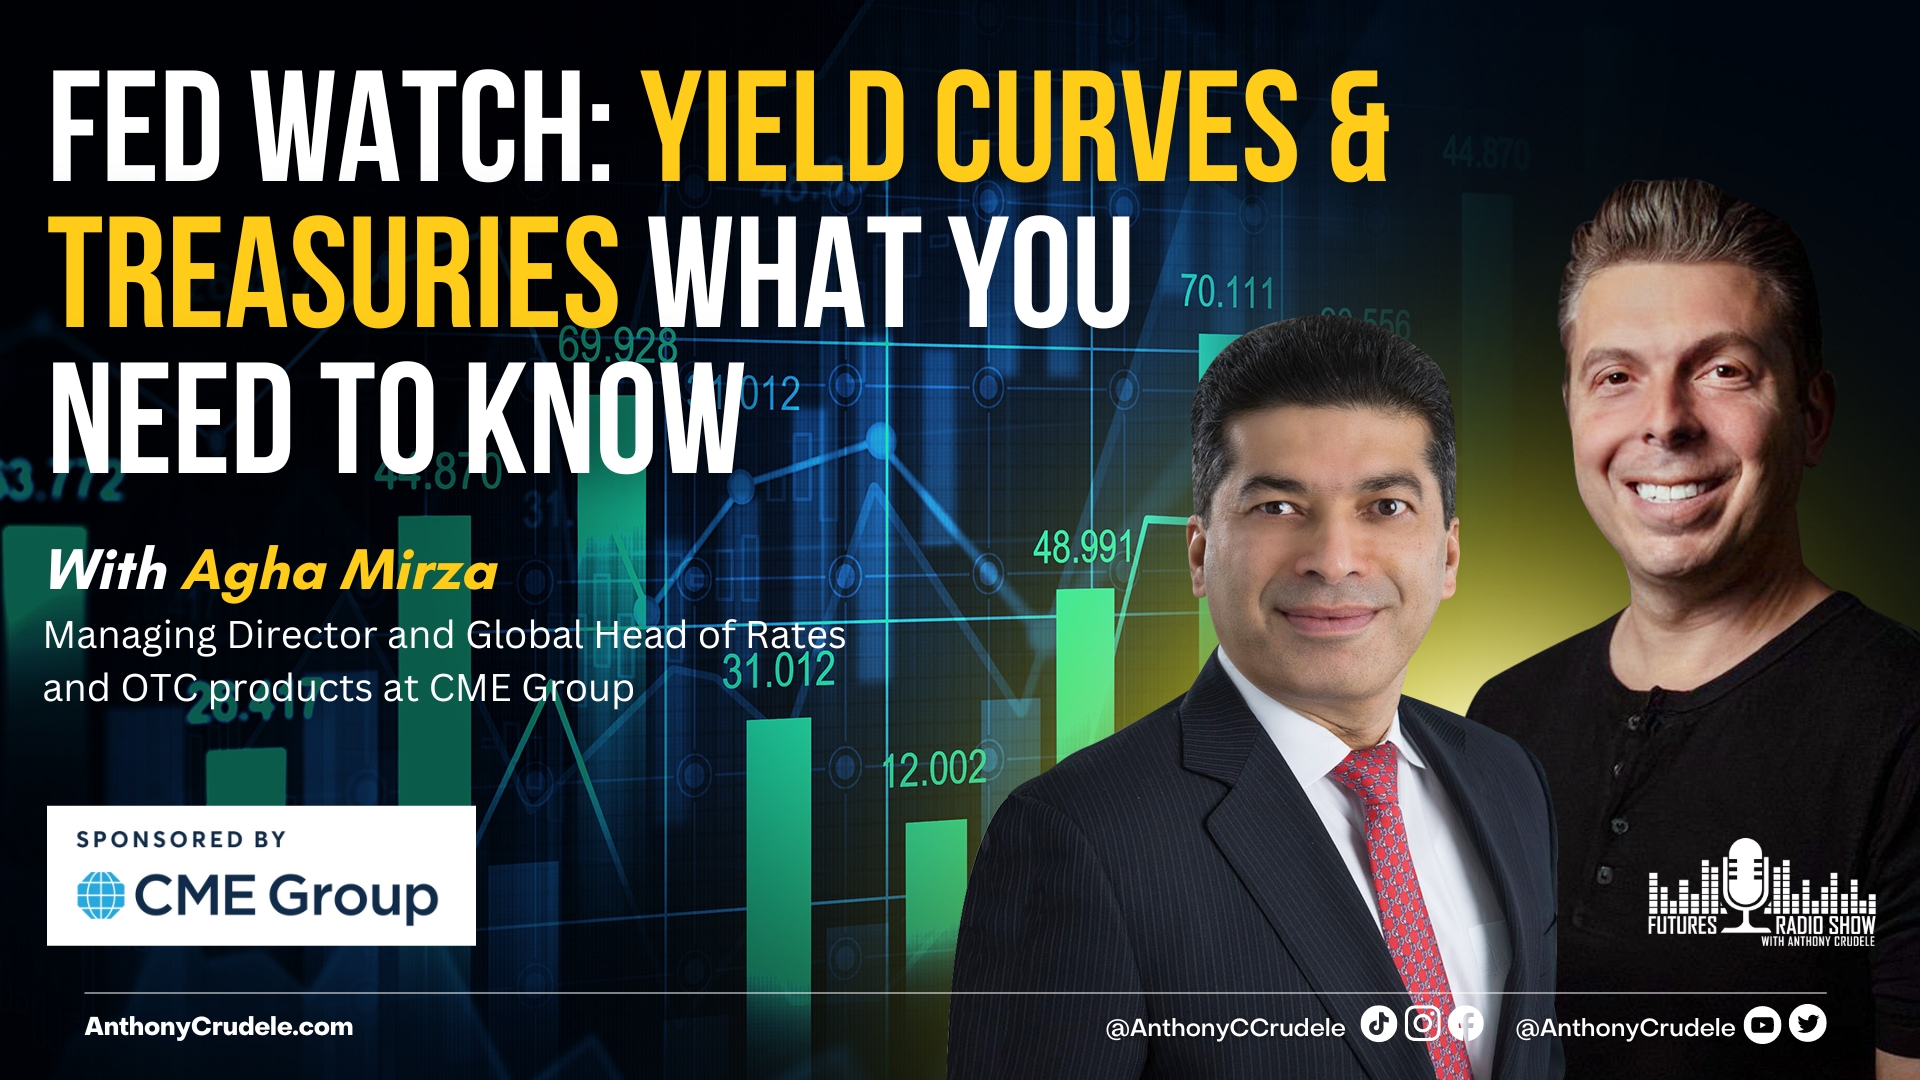 FED Watch:  Yield Curves & Treasuries What You Need To Know